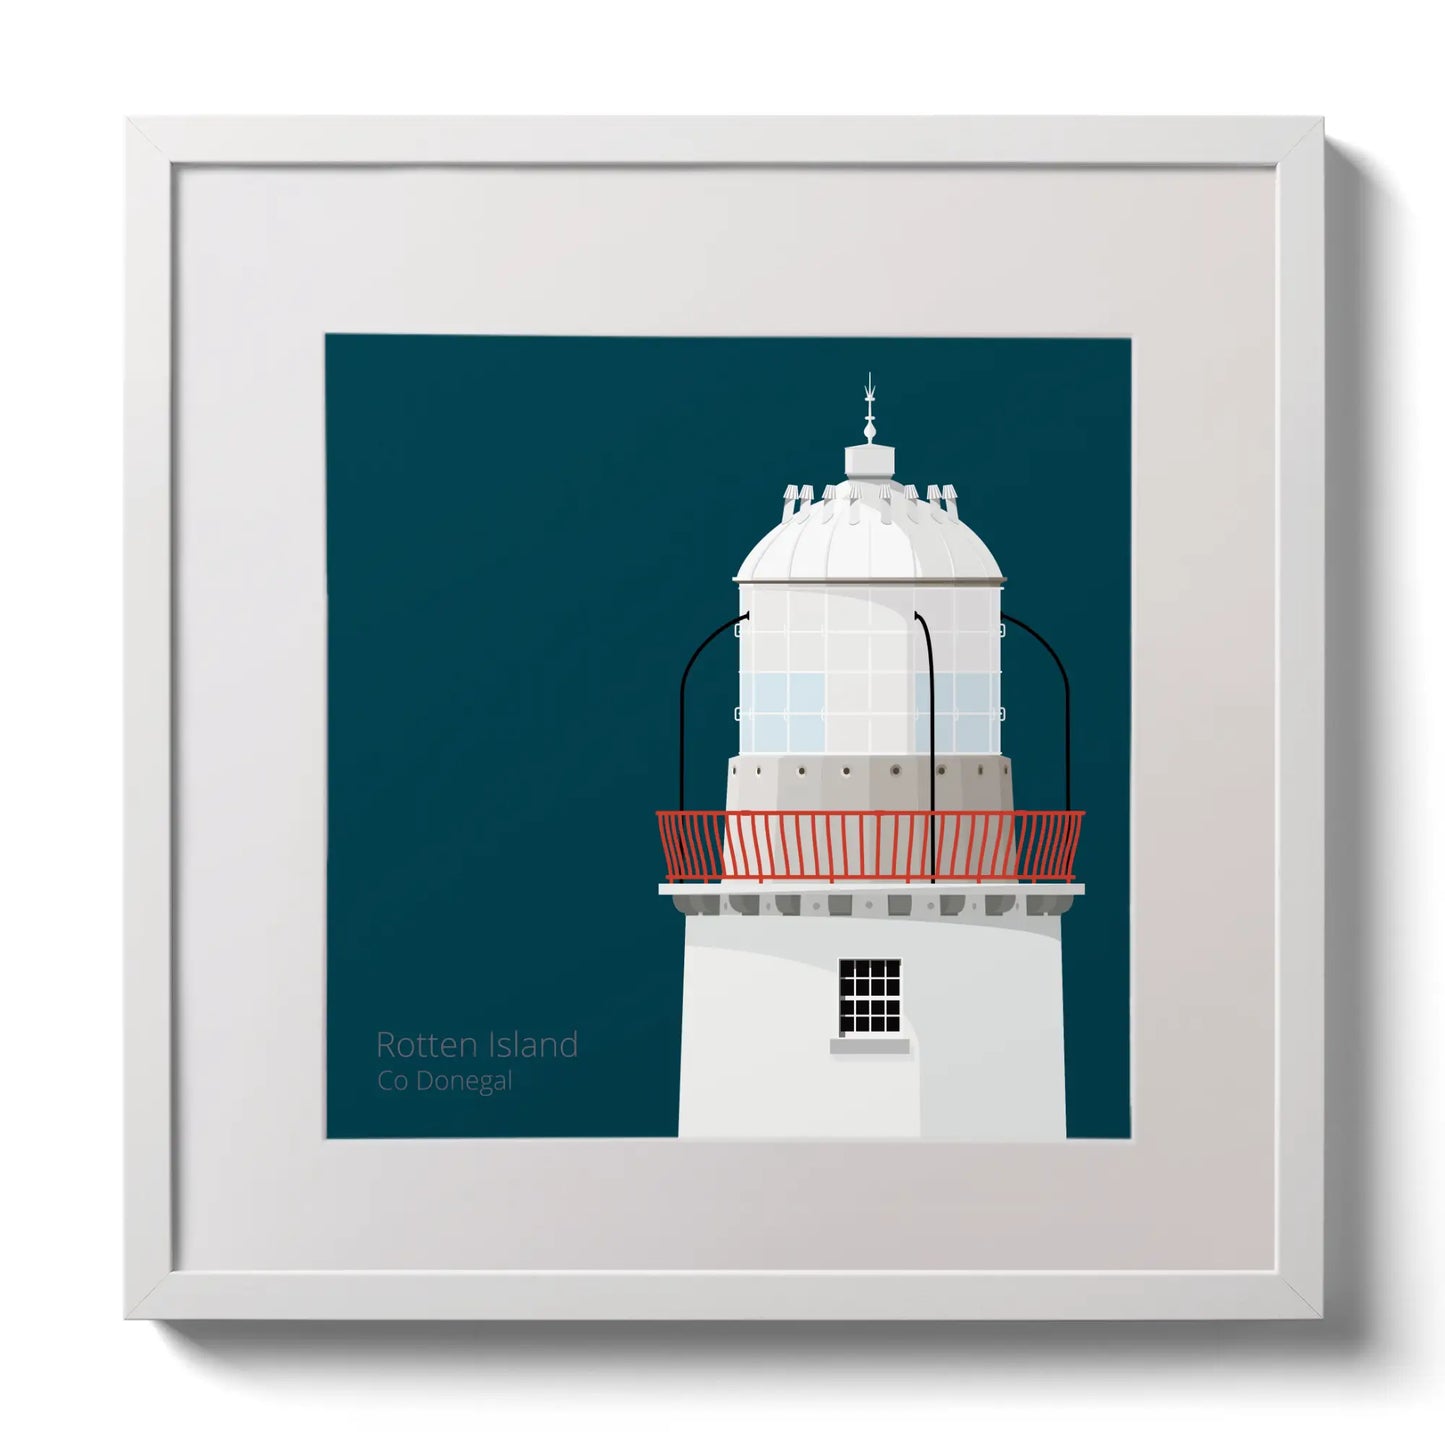 Illustration Rotten Island lighthouse on a midnight blue background,  in a white square frame measuring 30x30cm.